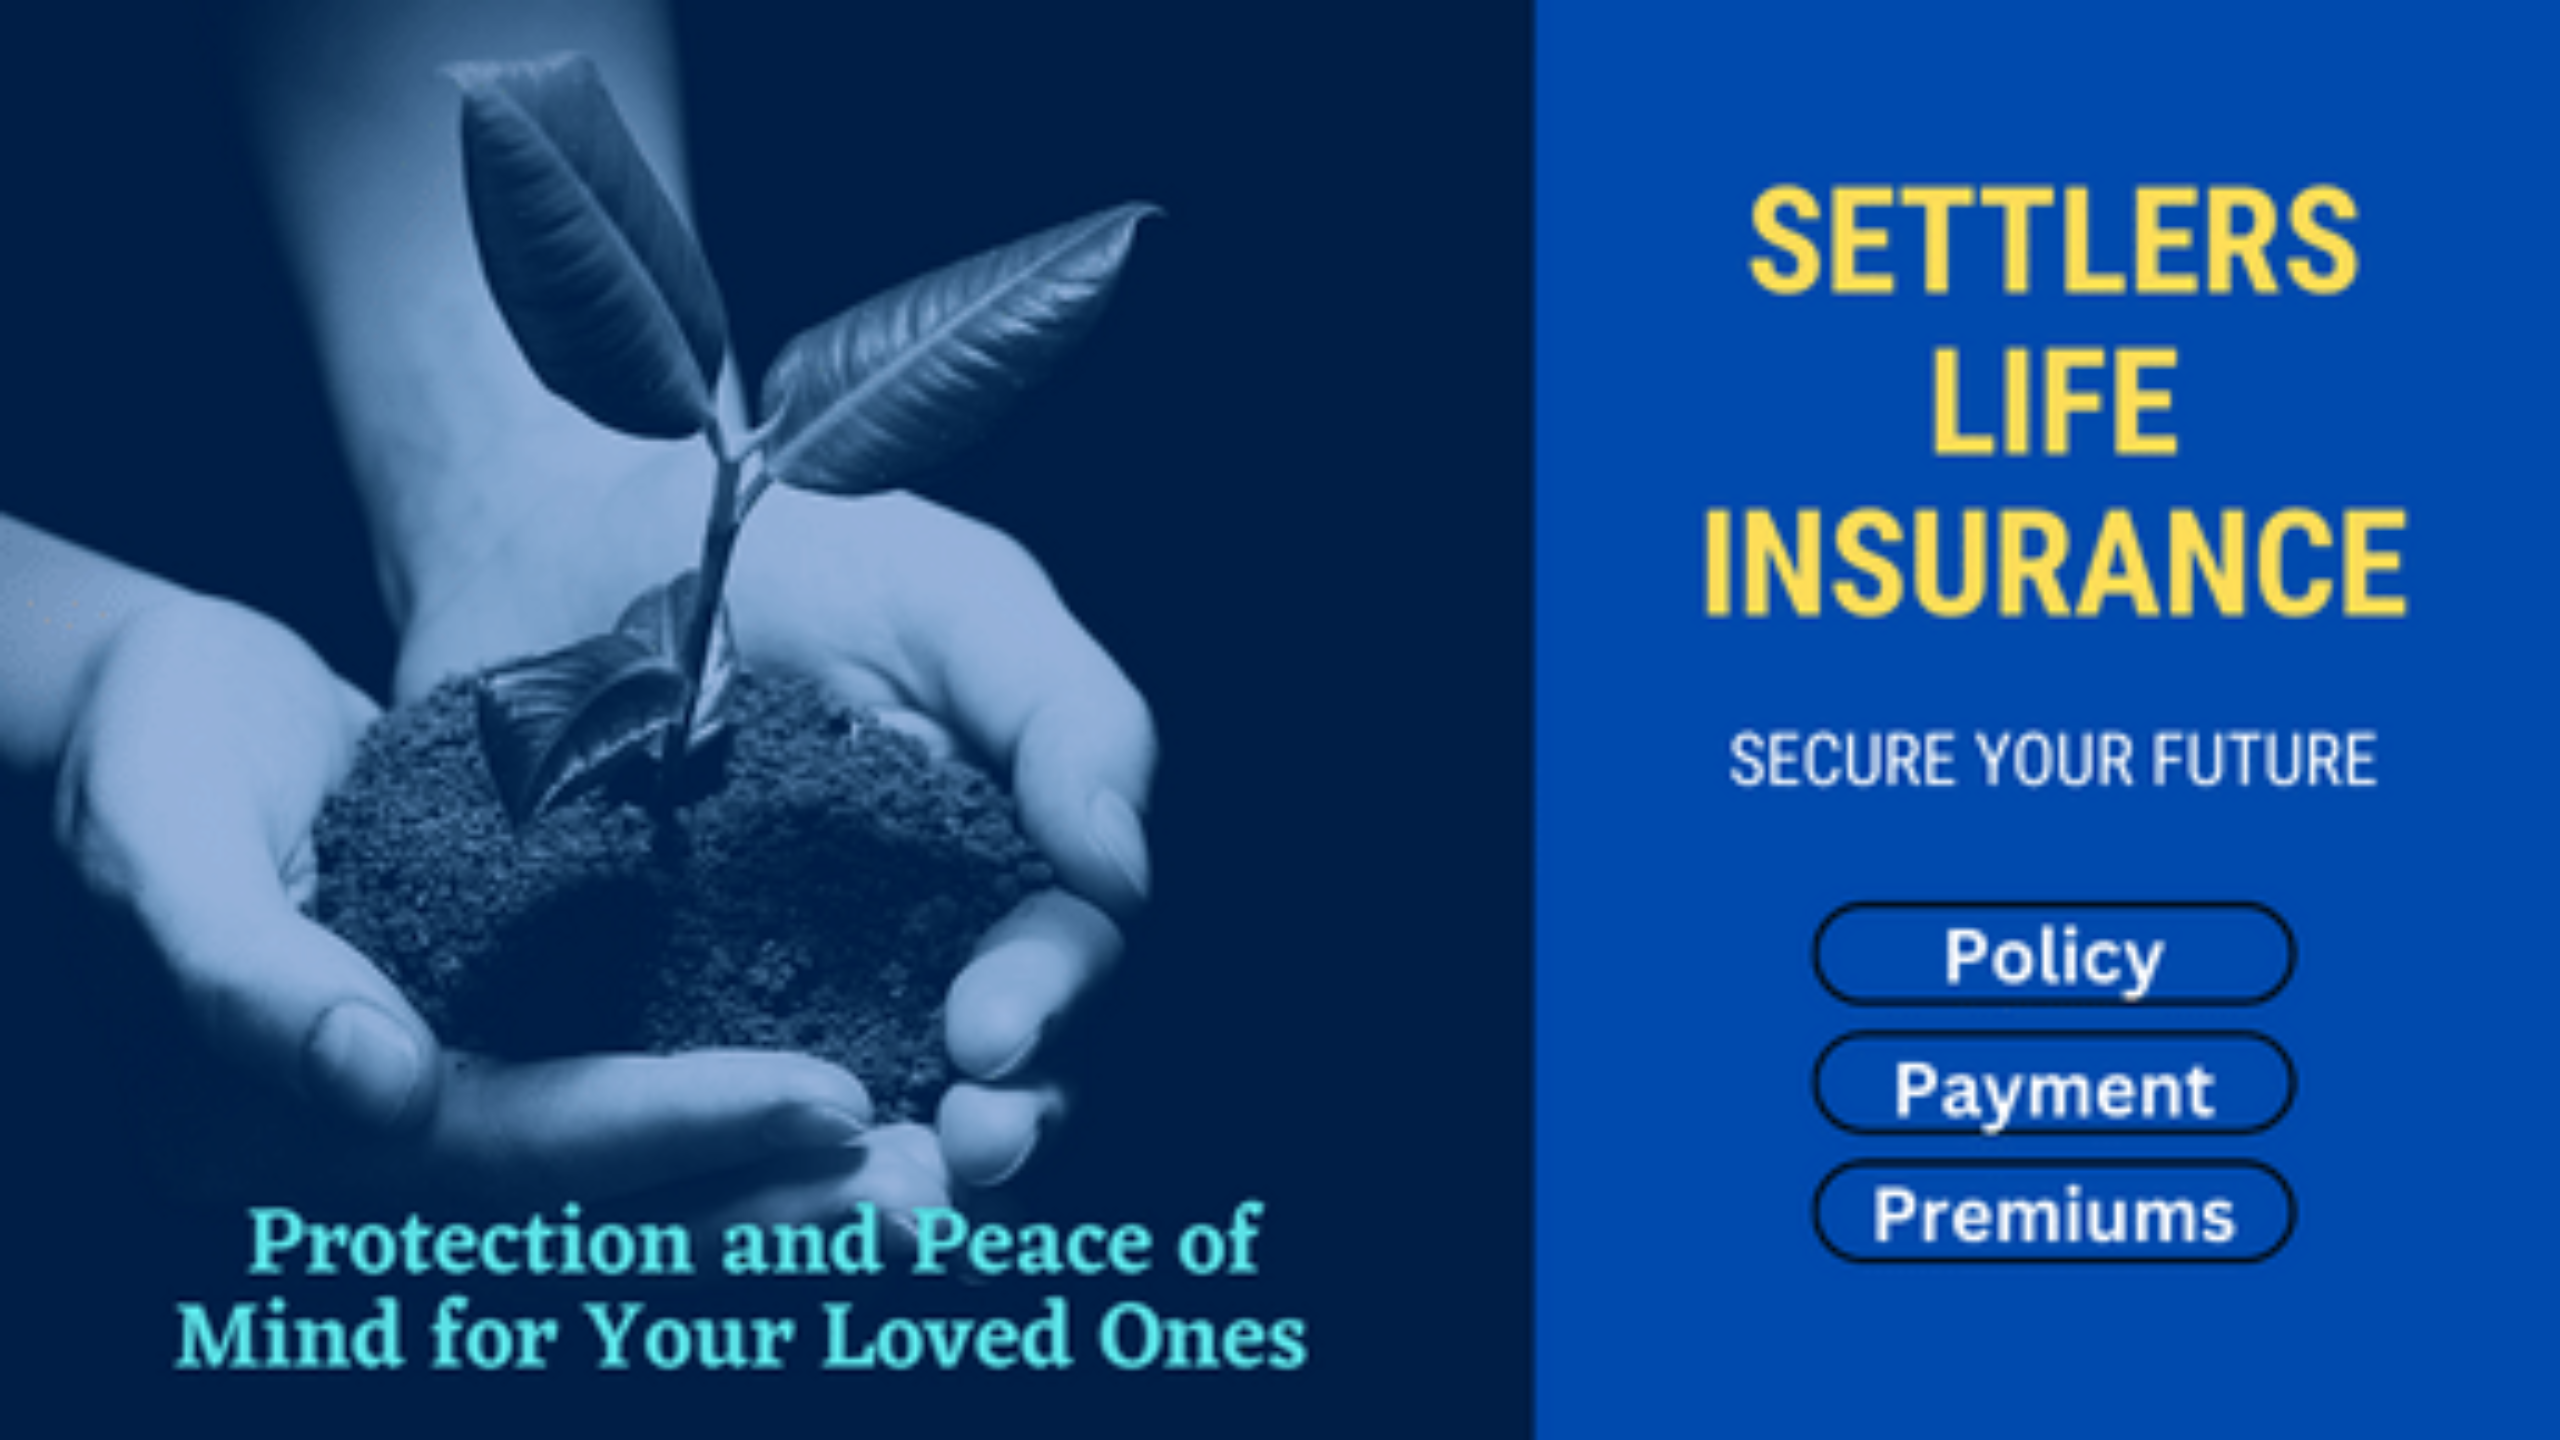 What Is Settlers Life Insurance and How Does It Work